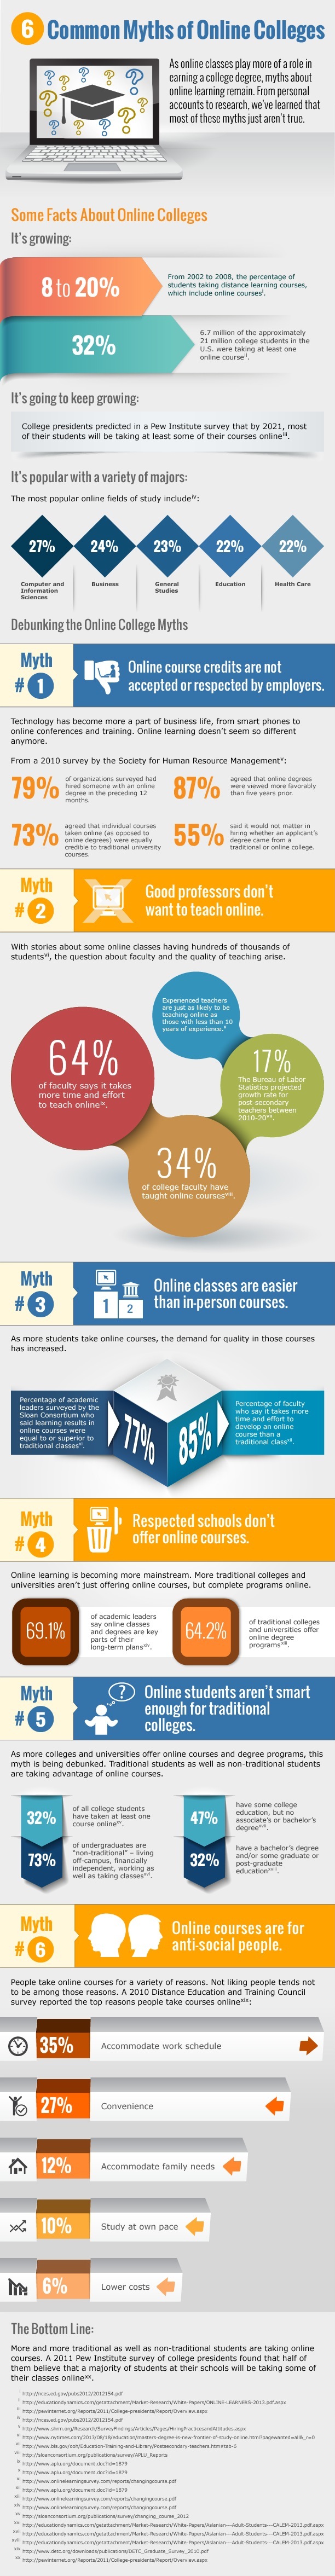 6 Common Myths of Online Colleges